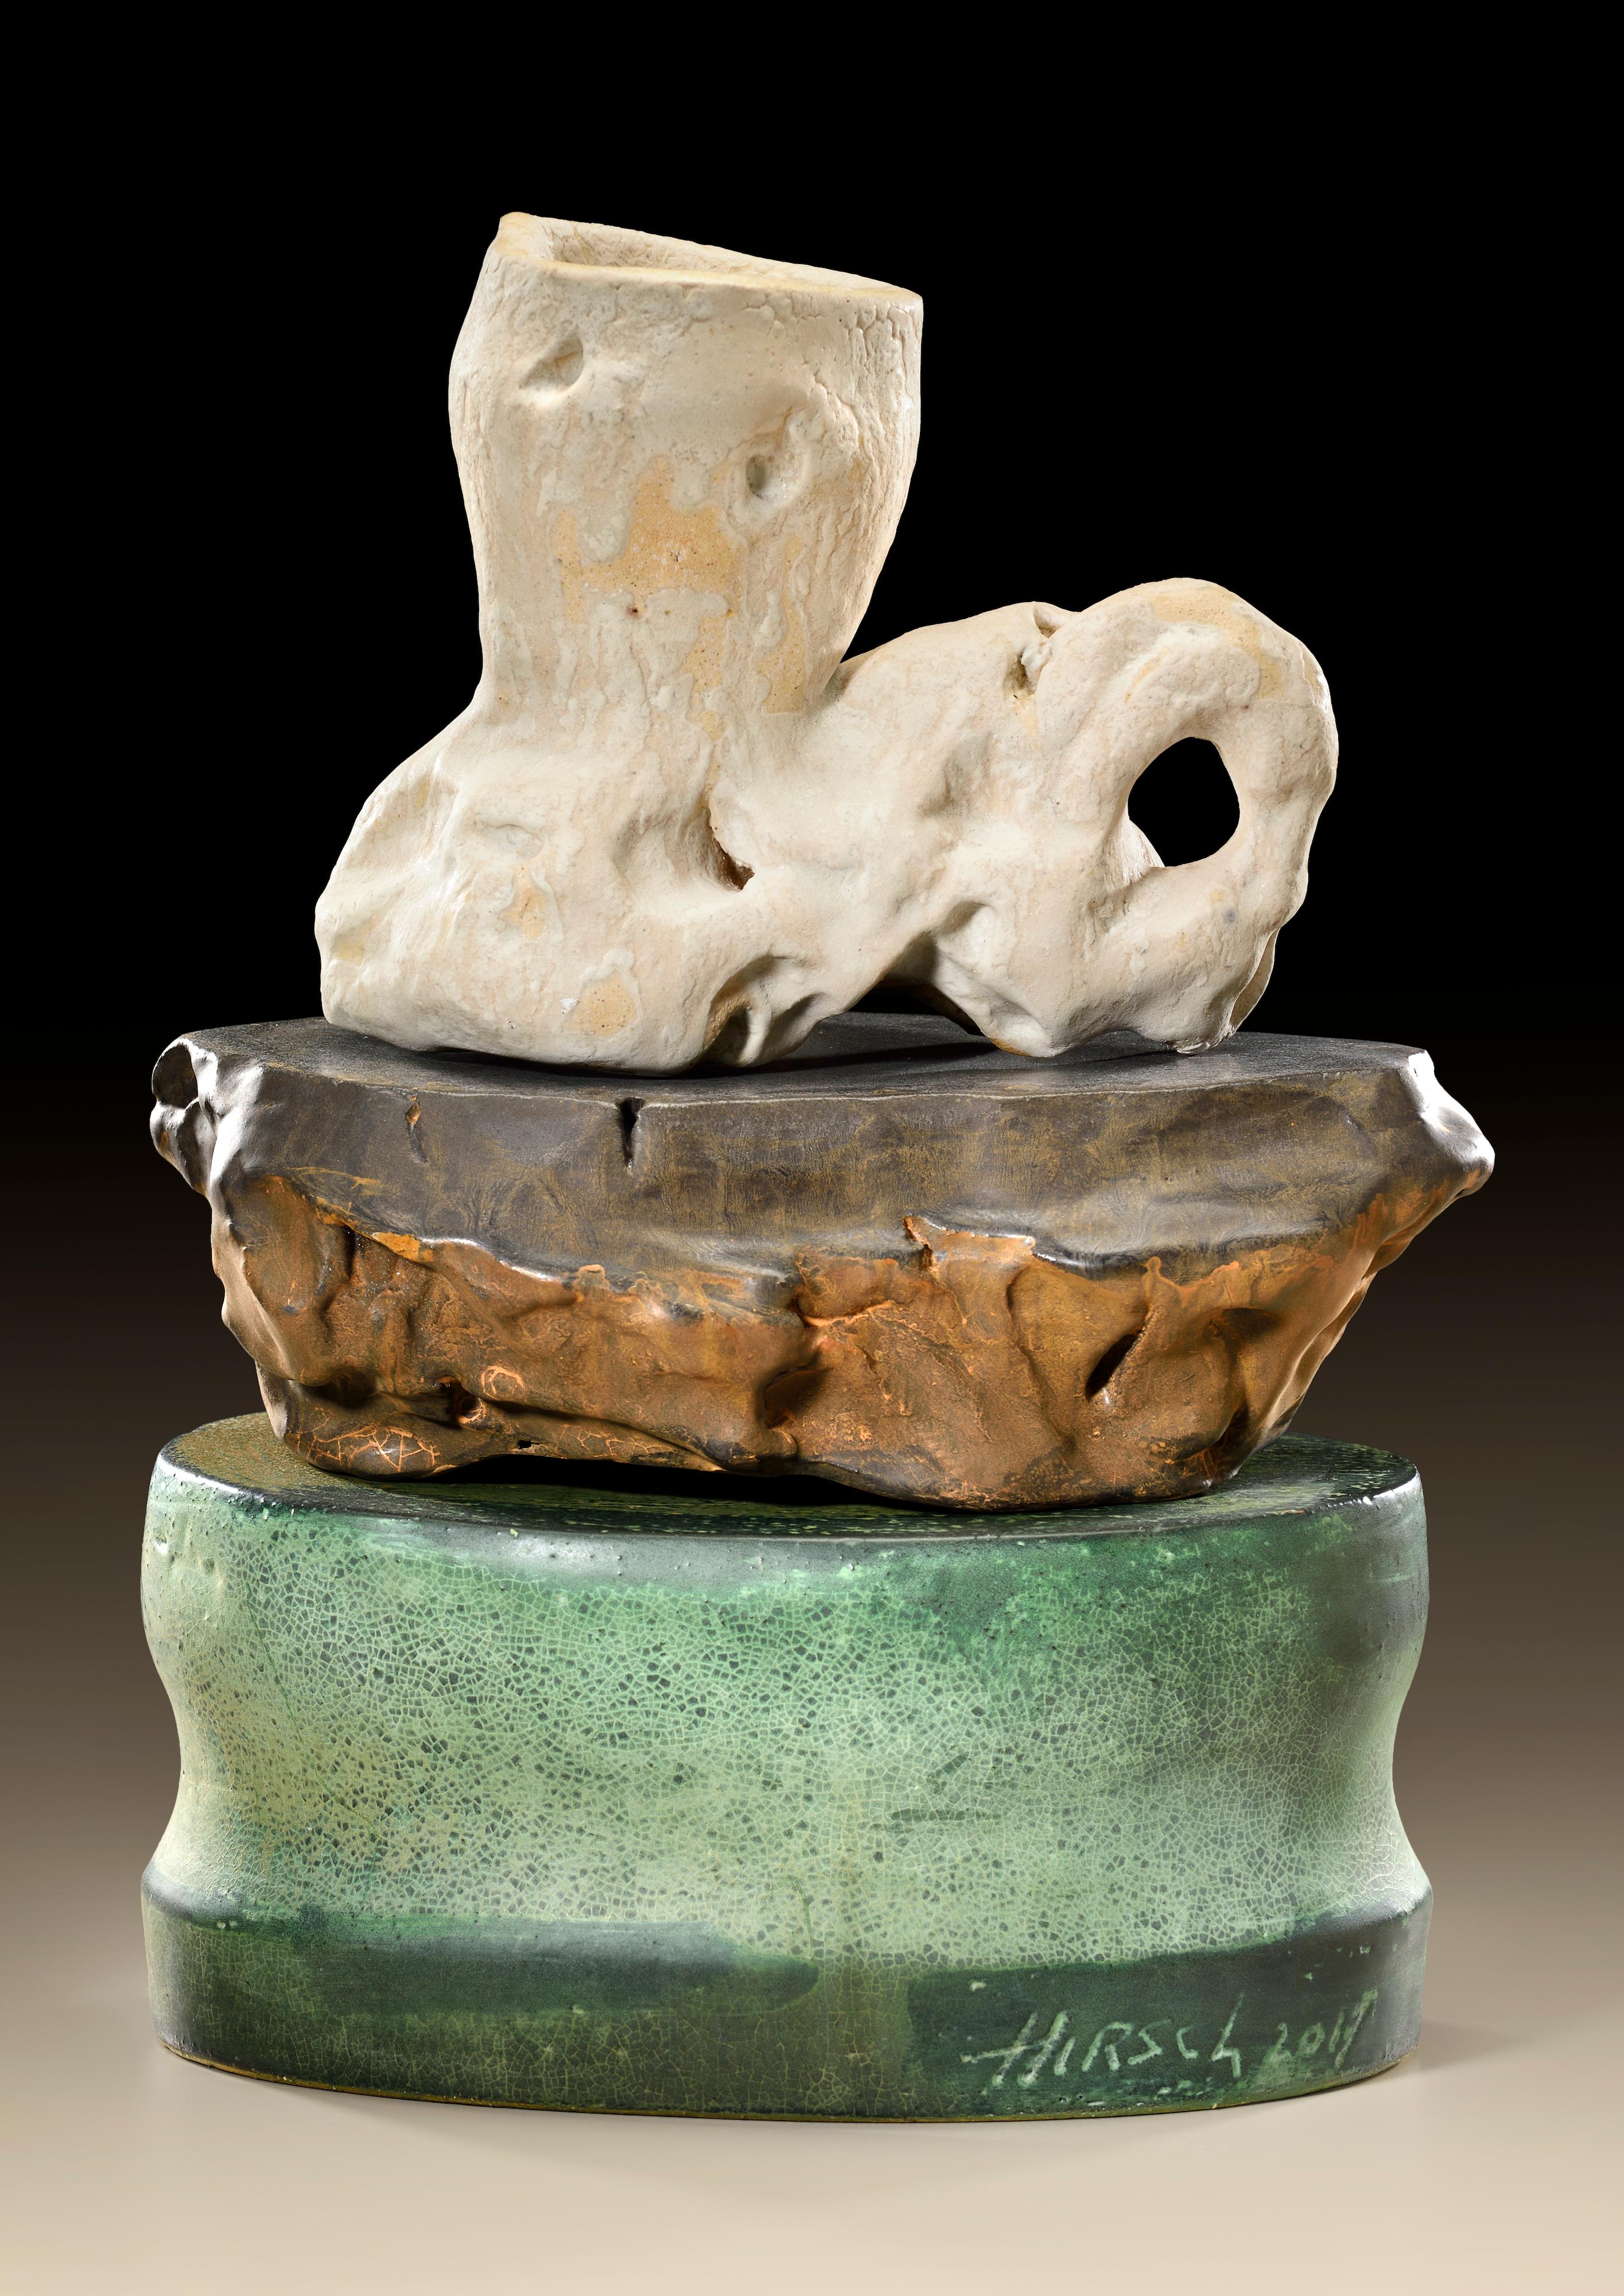 Richard Hirsch Ceramic Scholar Rock Cup Sculpture #32, 2017 - 2018 In Excellent Condition For Sale In New York, NY